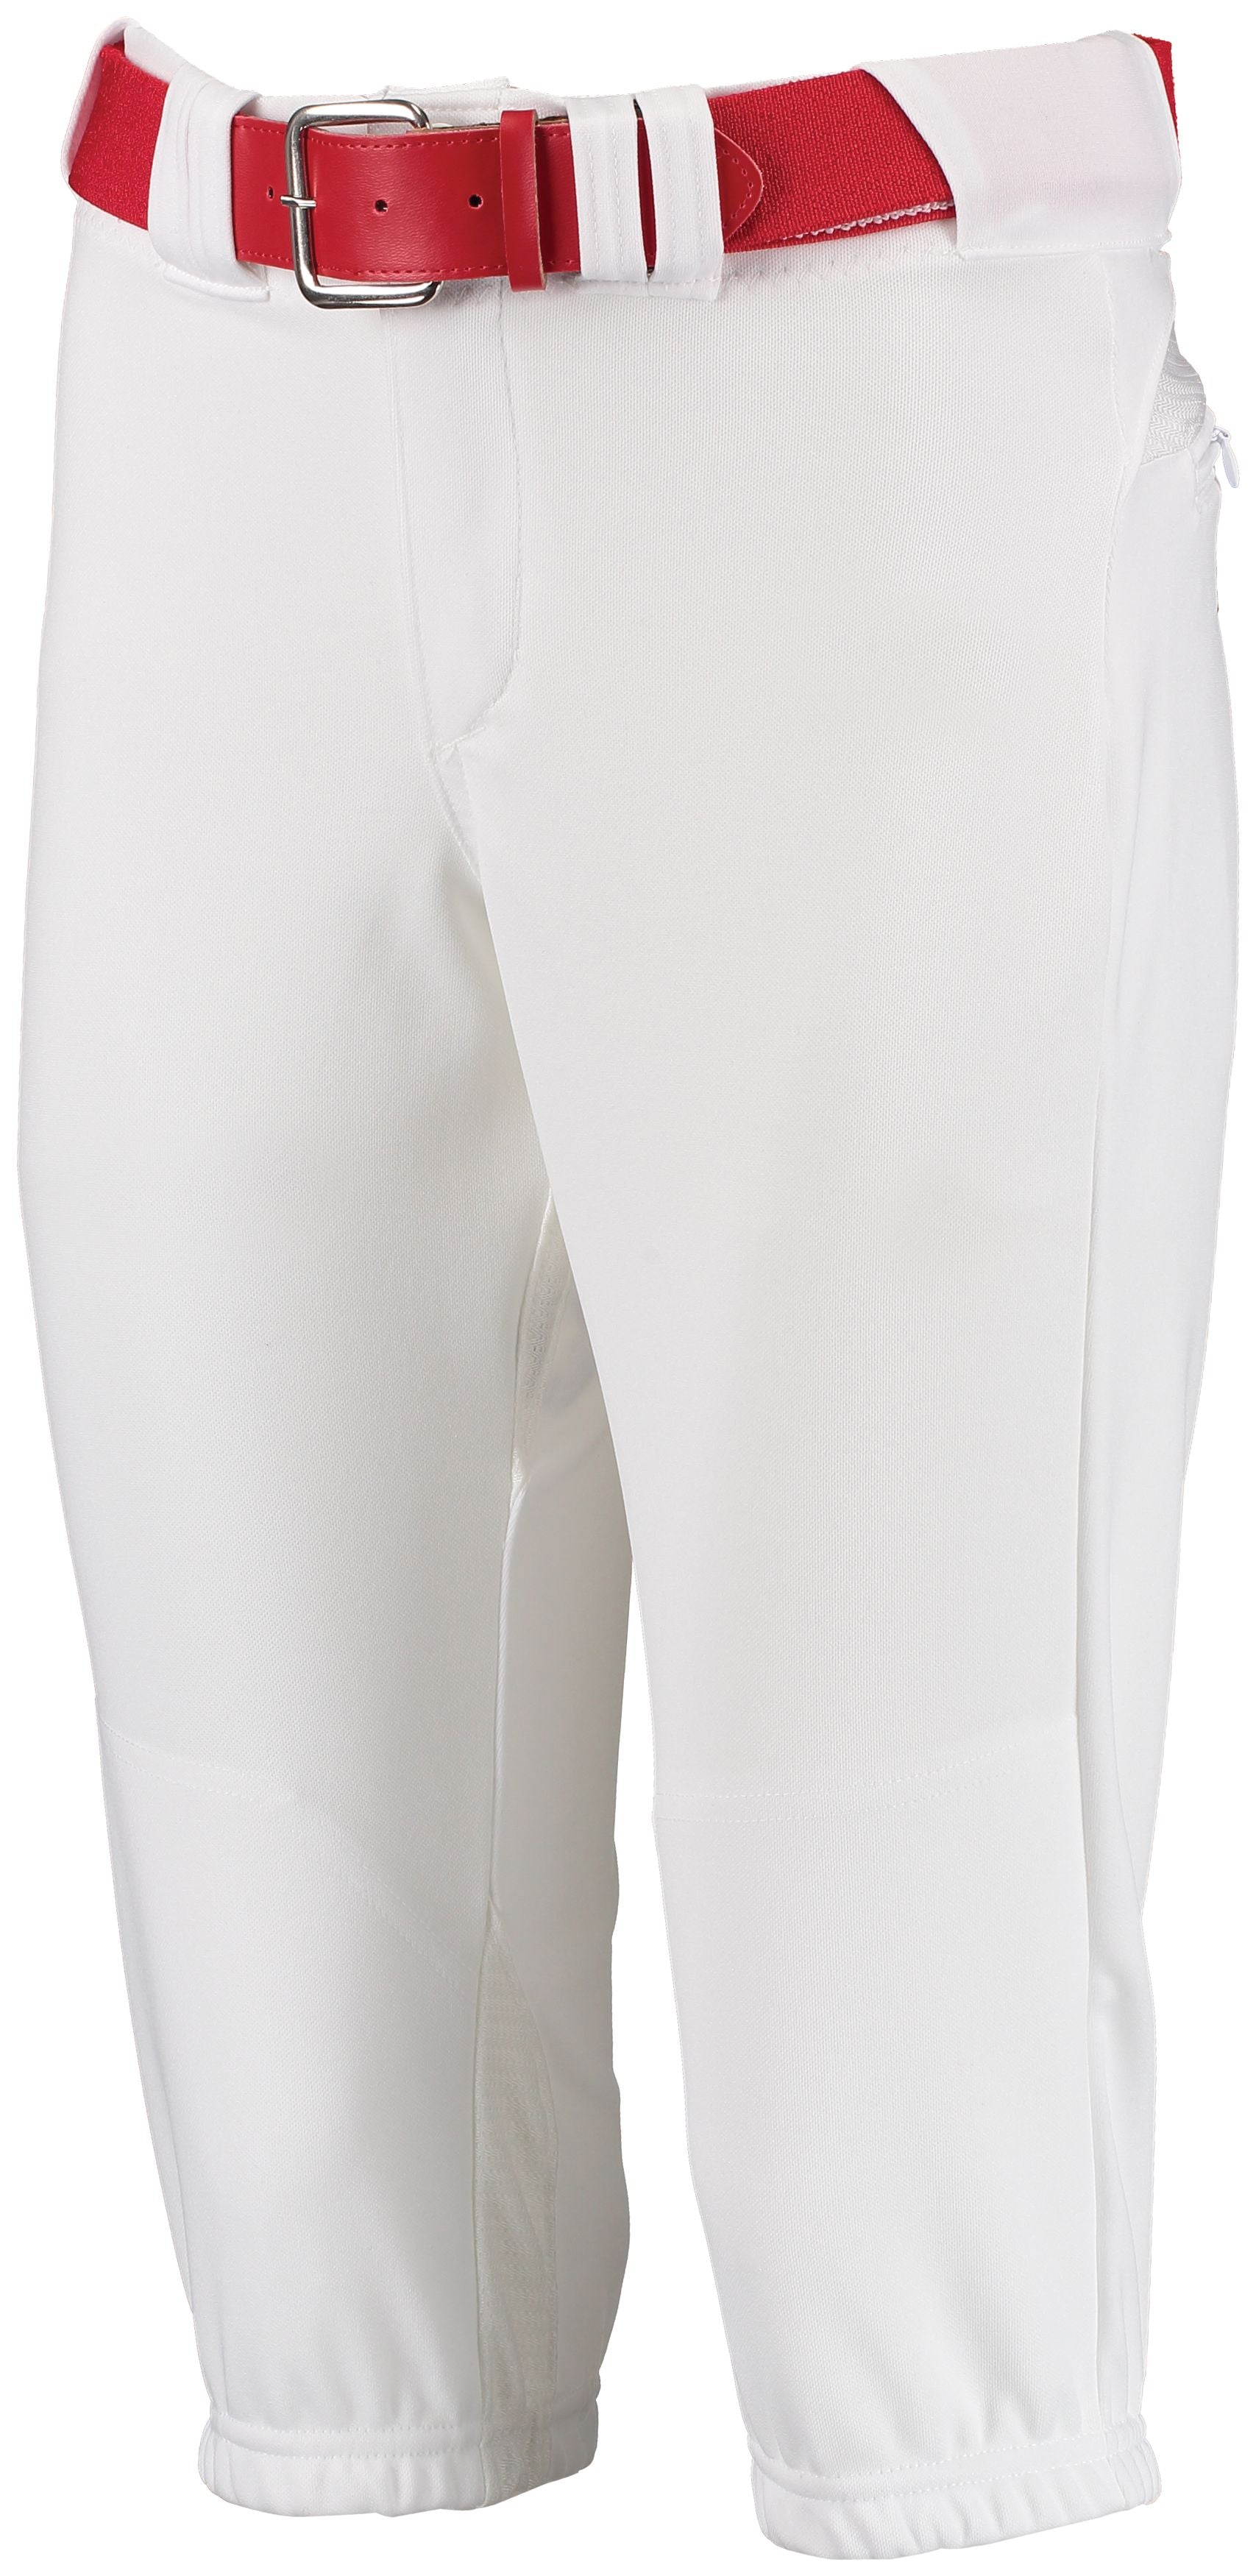 Russell Athletic Ladies Low Rise Diamond Fit Knicker in White  -Part of the Ladies, Softball, Russell-Athletic-Products product lines at KanaleyCreations.com